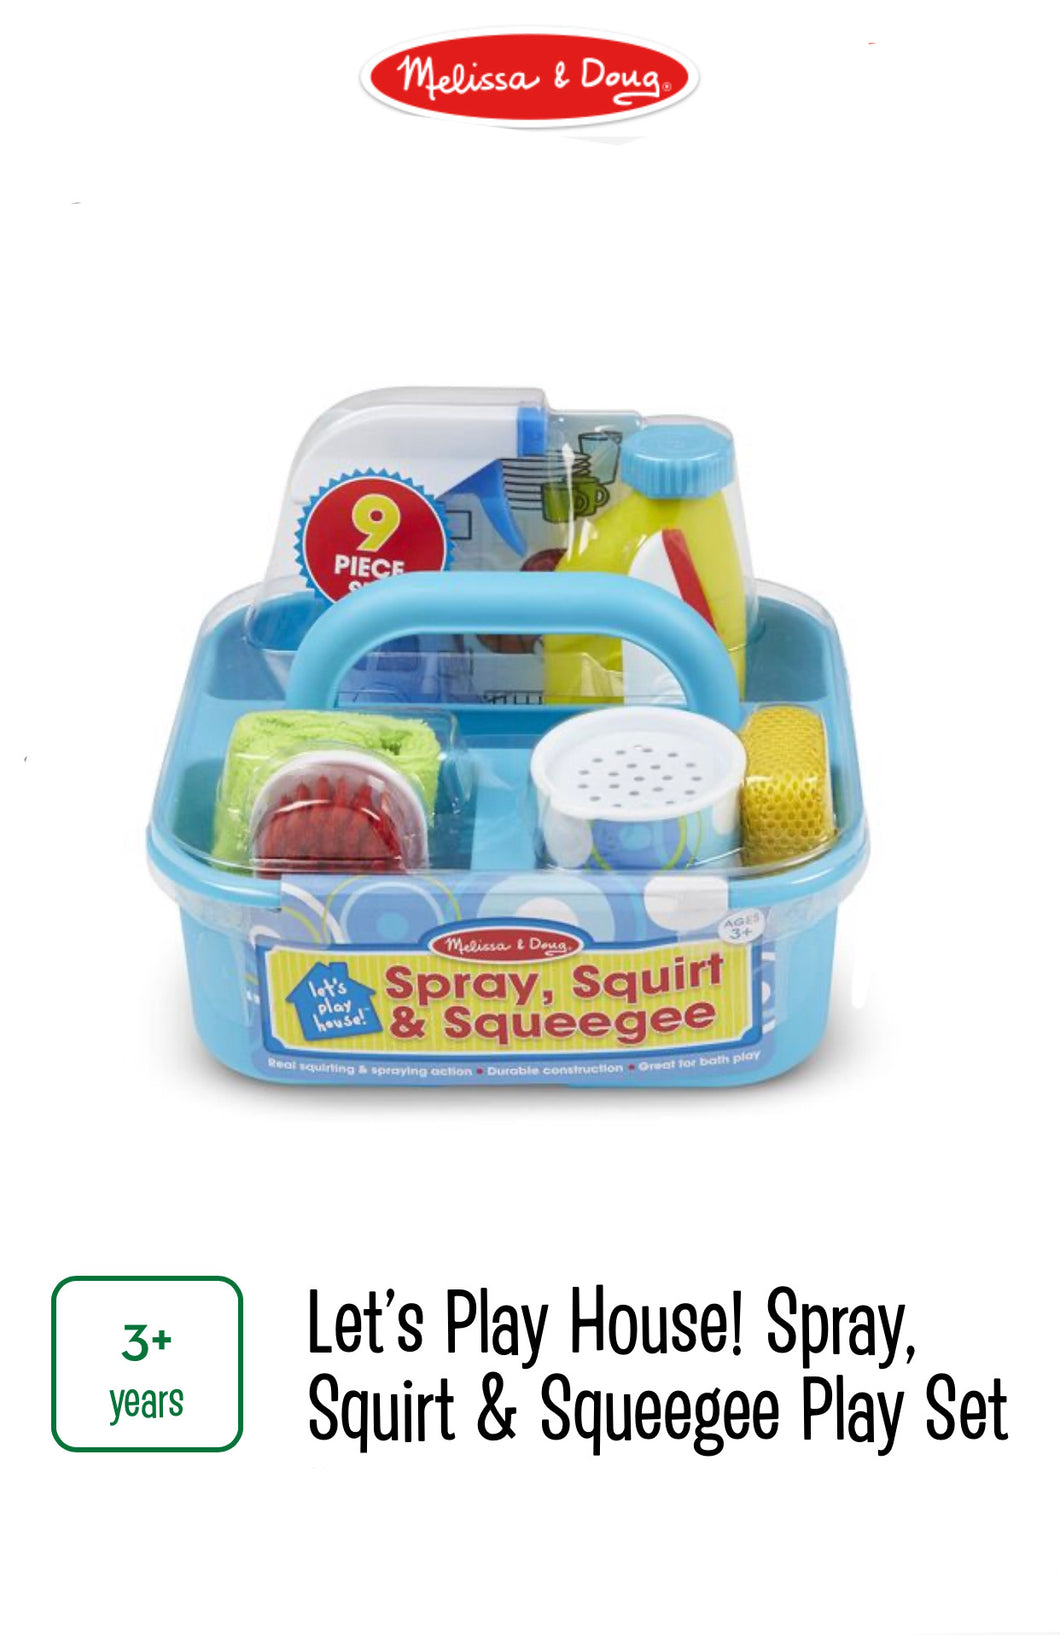 Spray! Squirt! & Squeegee Play Set